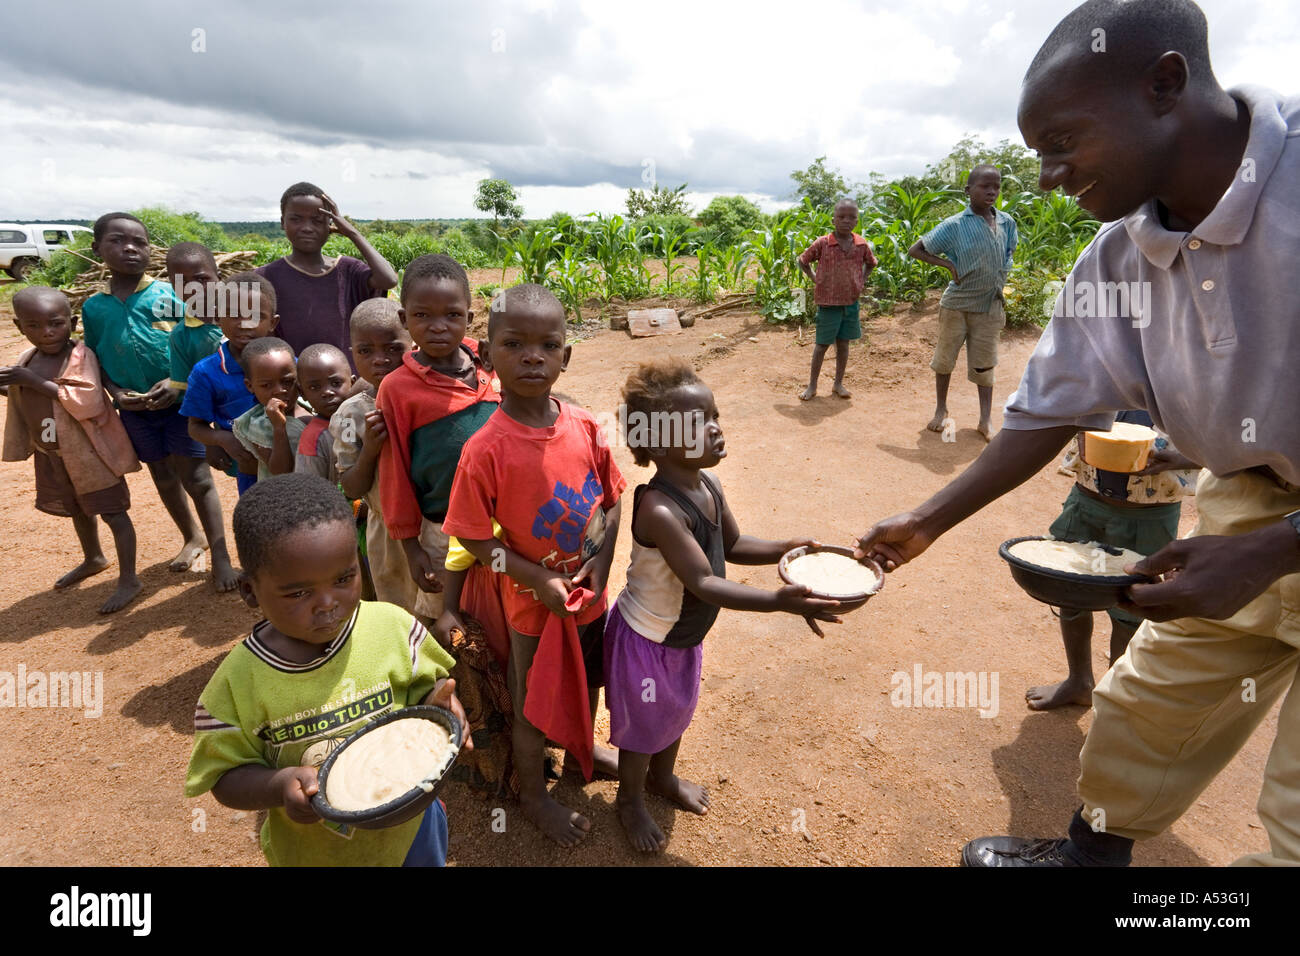 Serving phala to hungry children as part of the Joseph Project feeding programme in the village of Buli, Malawi, Africa Stock Photo